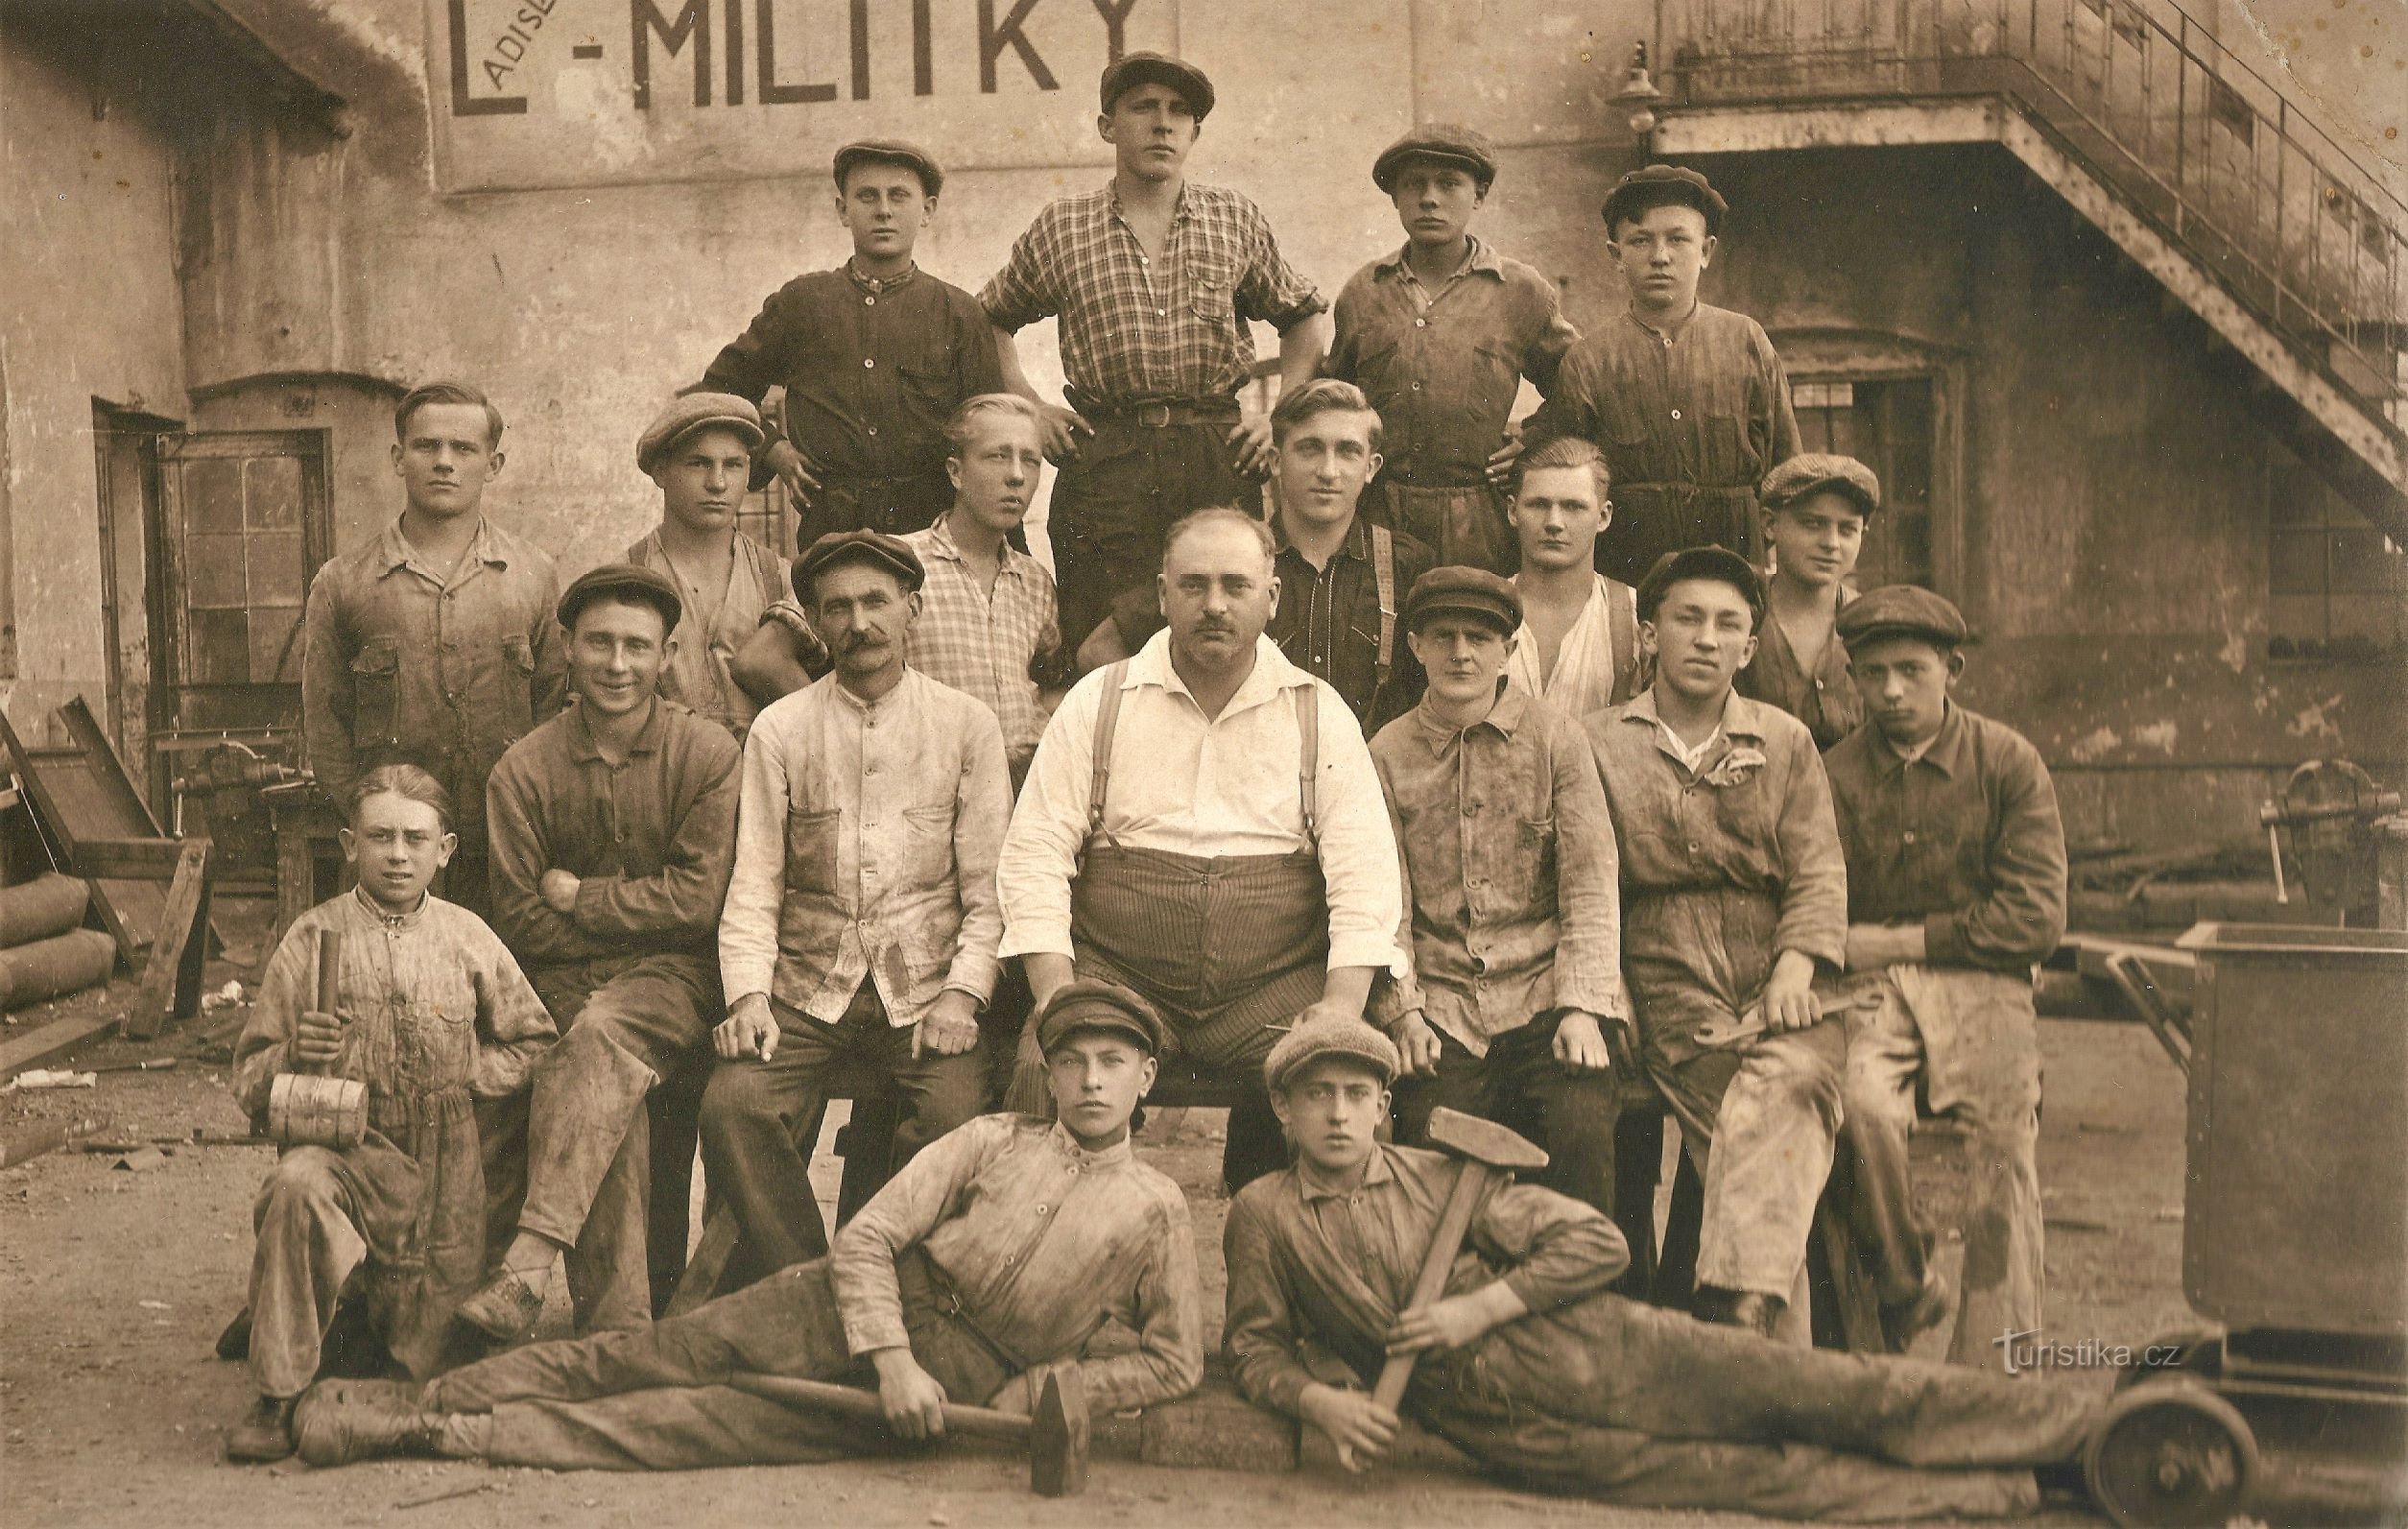 Ladislav Militký company staff from the early 30s